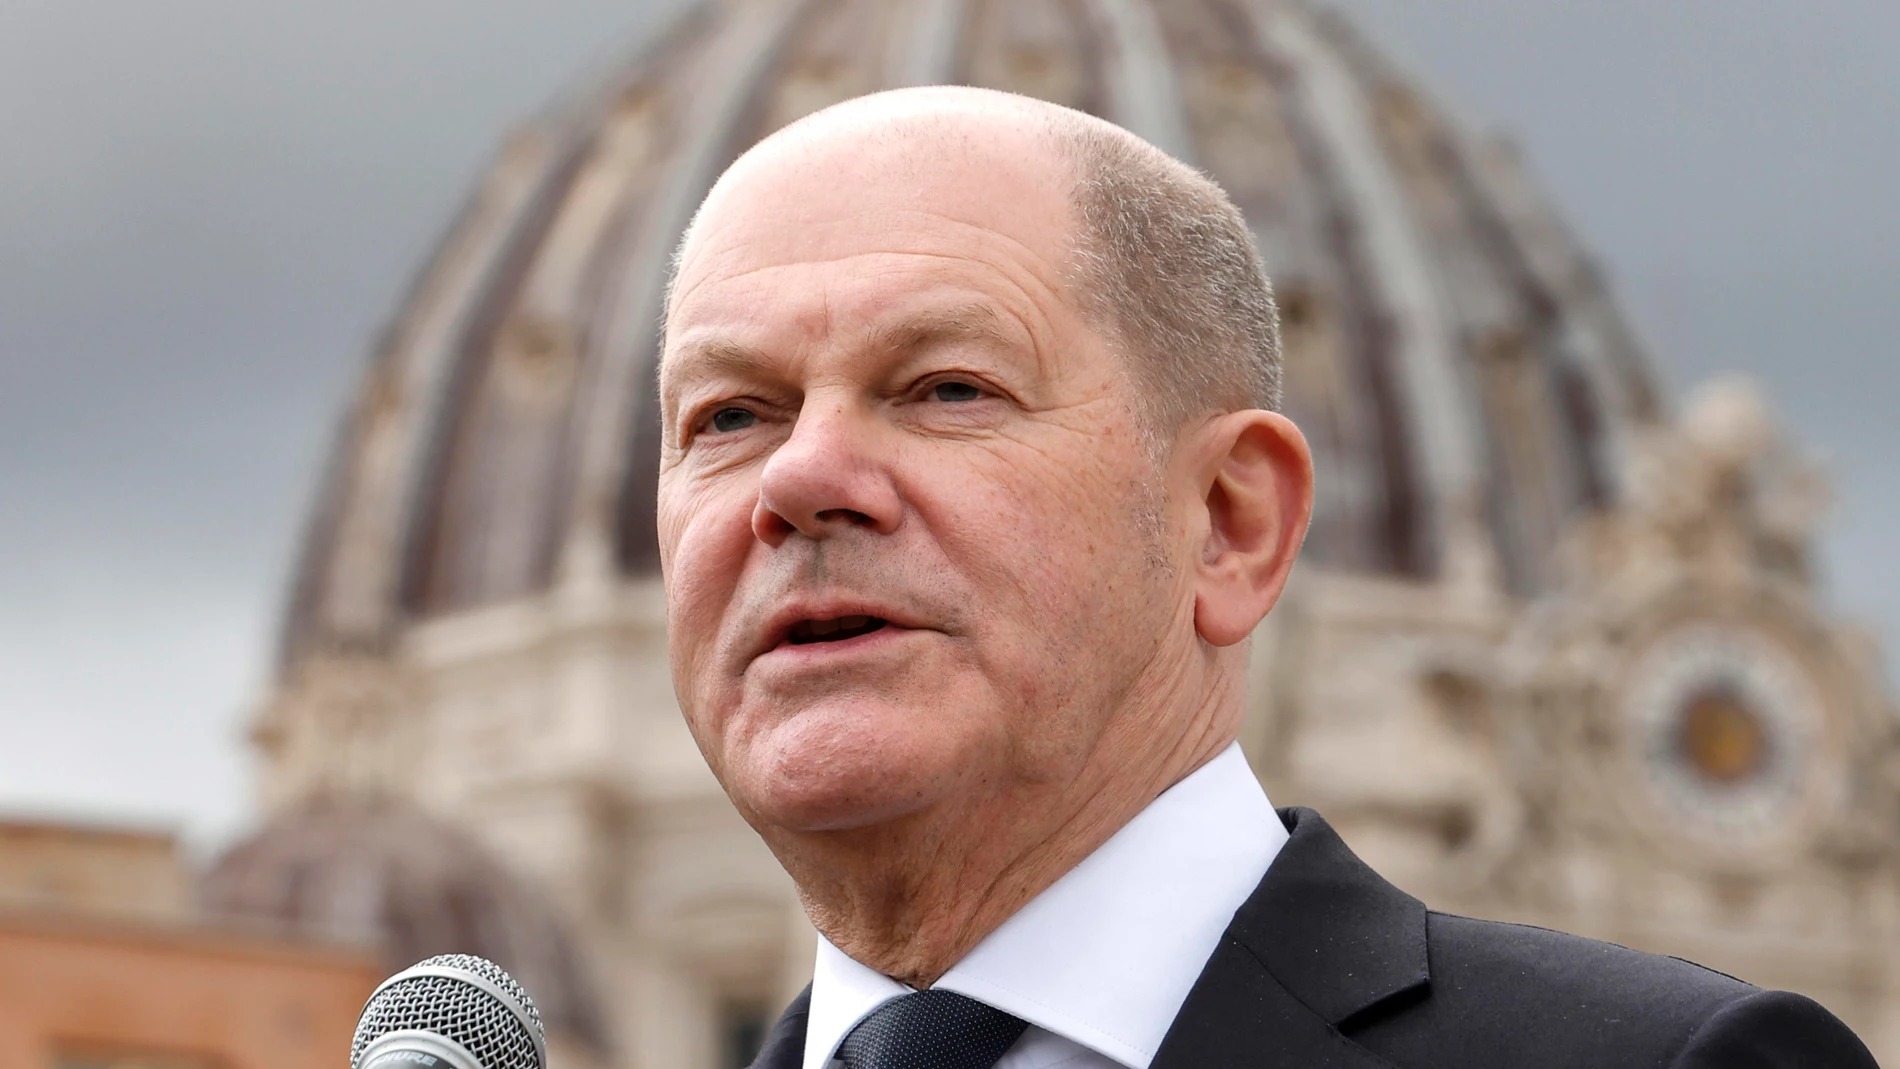 Rome (Italy), 02/03/2024.- German Chancellor Olaf Scholz speaks to the media at the Paolo VI hotel on the occasion of his meeting with Pope Francis (not pictured), in Rome, Italy, 02 March 2024. The German Chancellor is on an official visit to Rome. Scholz was scheduled to meet Pope Francis on 02 March for his first private audience with the Pope. (Papa, Alemania, Italia, Roma) EFE/EPA/GIUSEPPE LAMI 